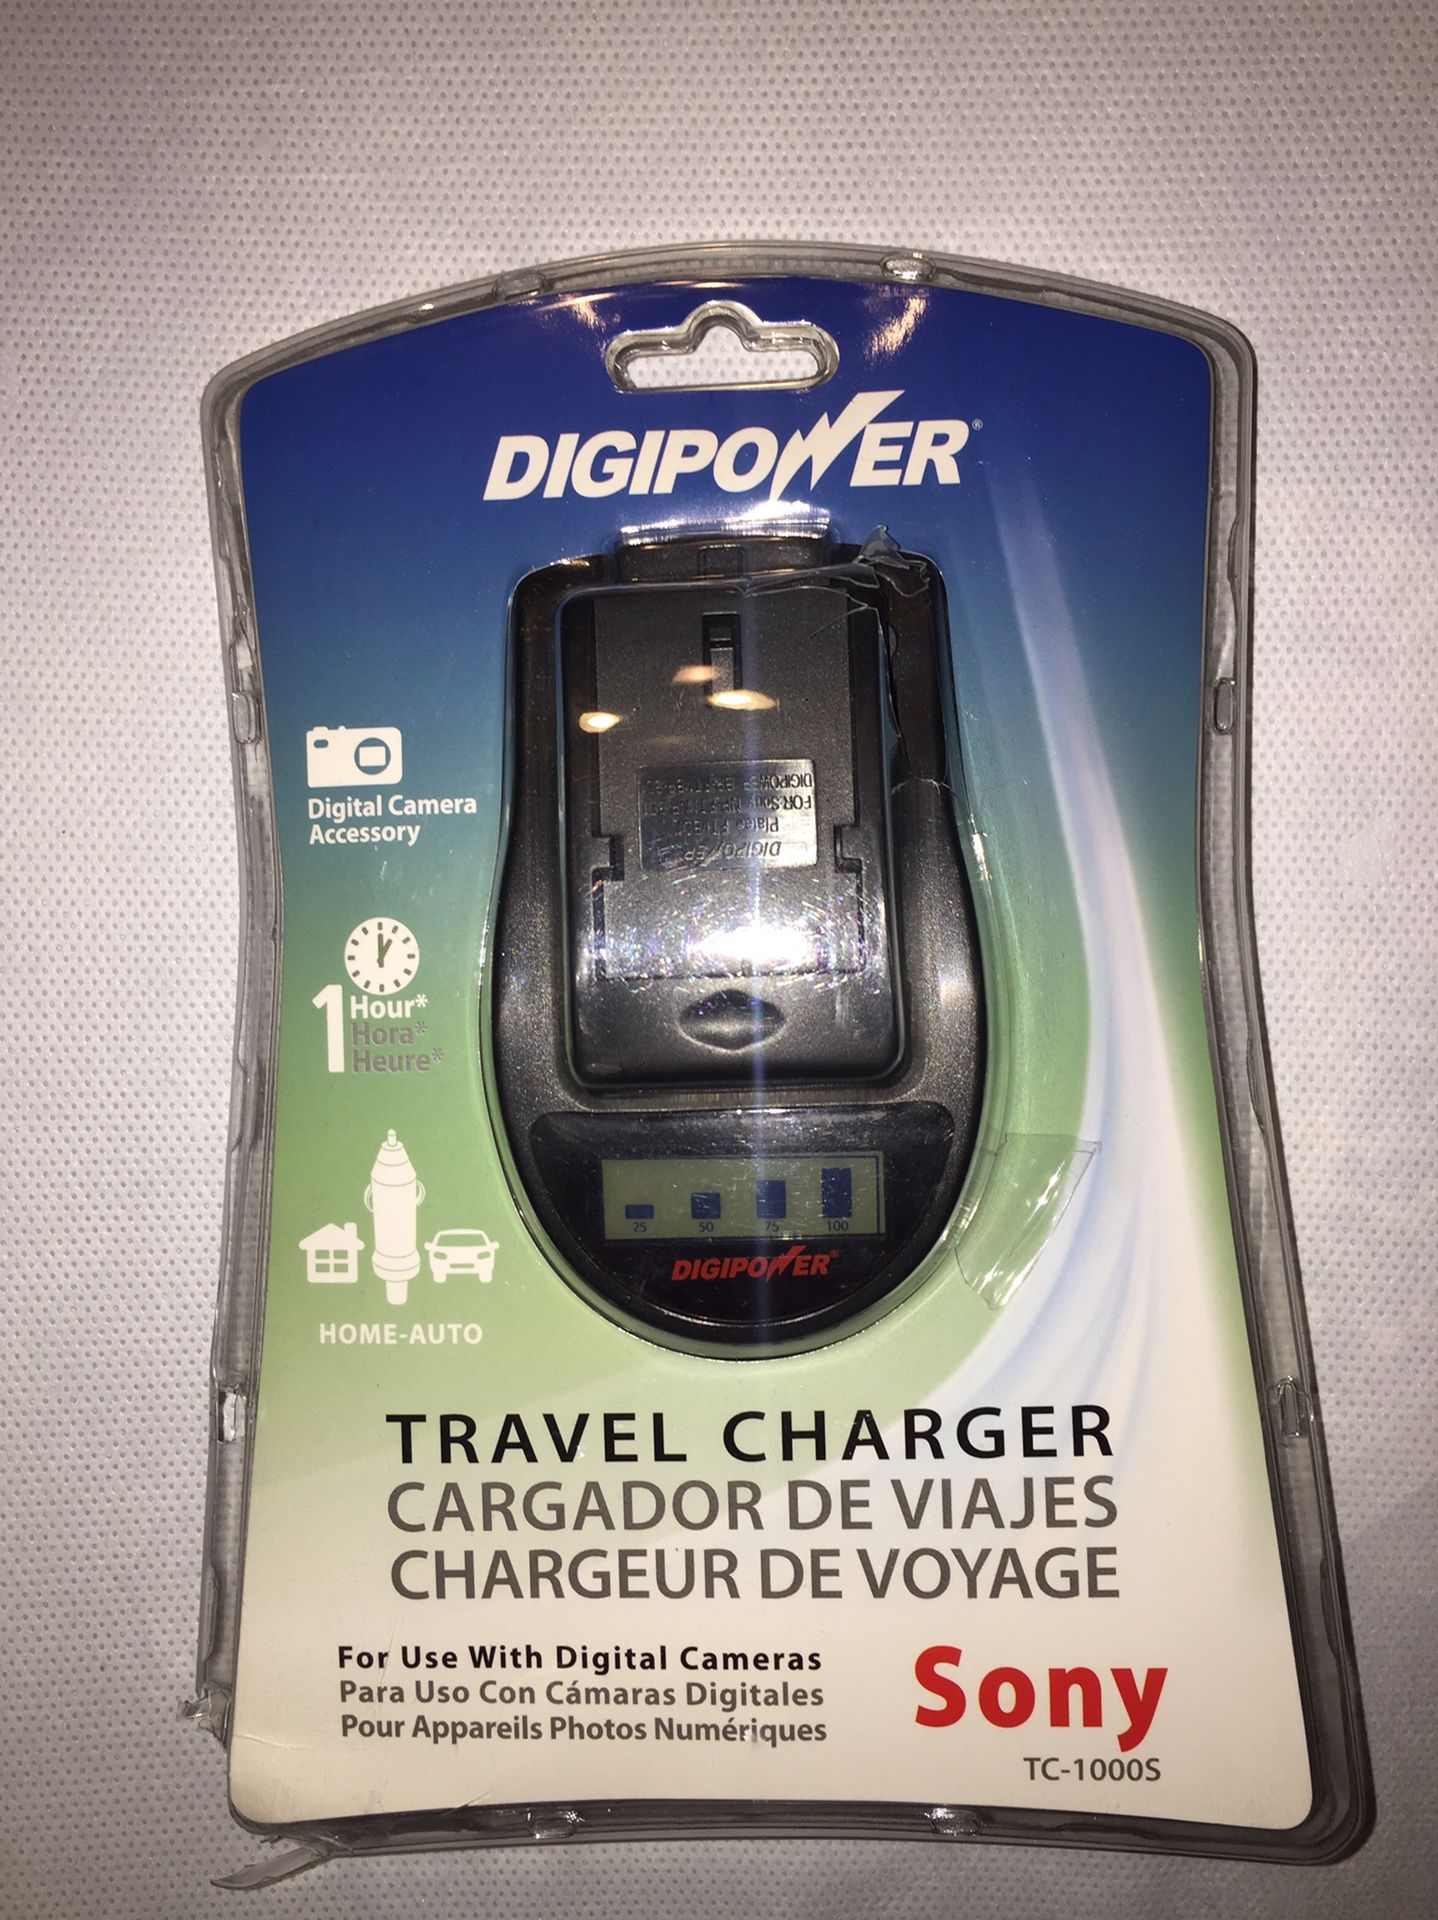 Sony digi power travel charger